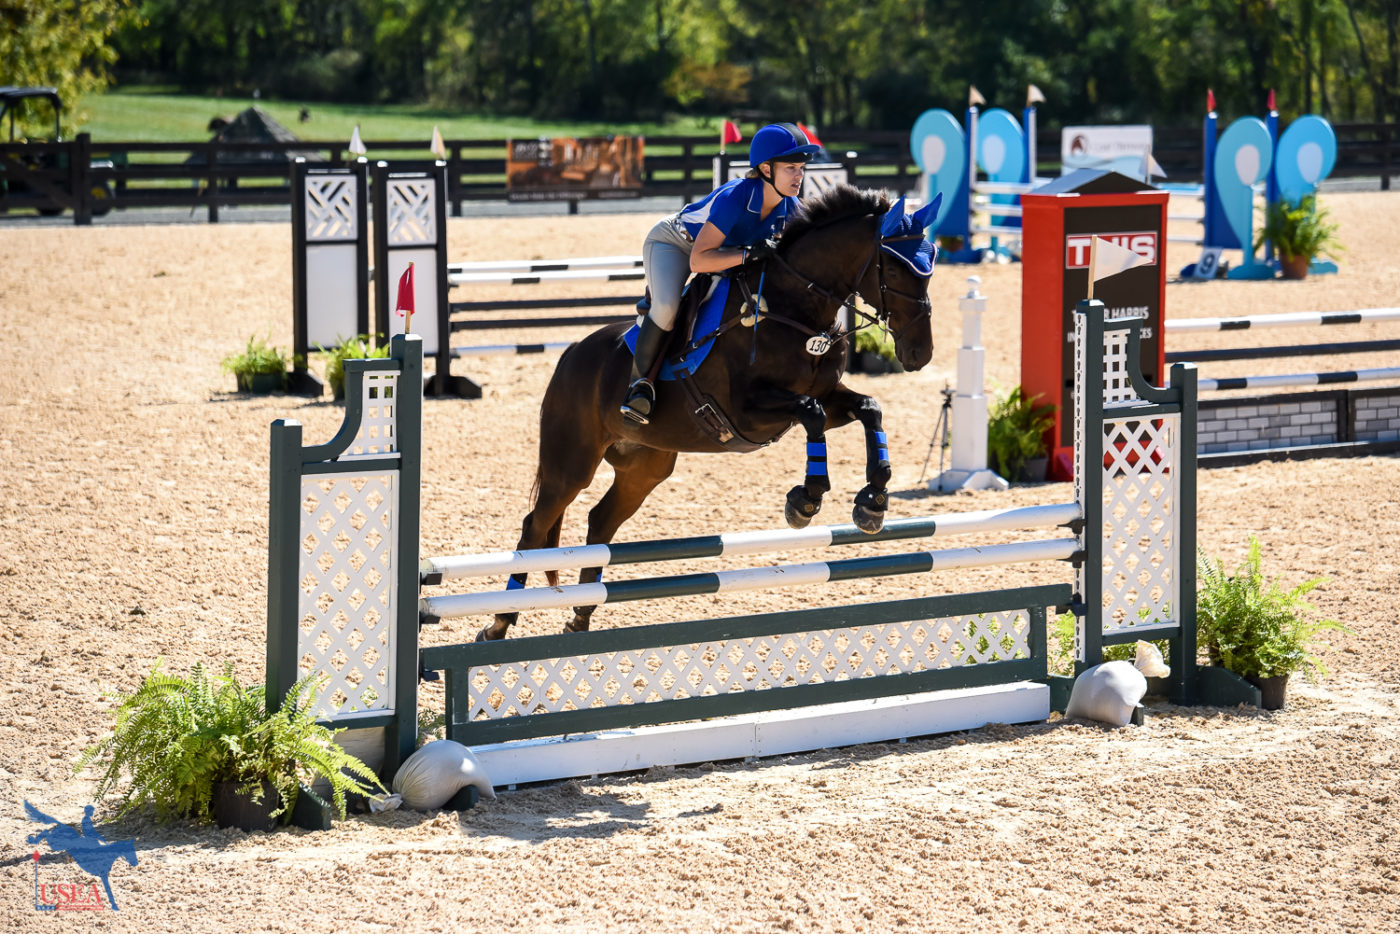 As this one a one-day event for the Training, Preliminary, and Novice riders, many show jumped in their cross-country gear. USEA/Jessica Duffy Photo.